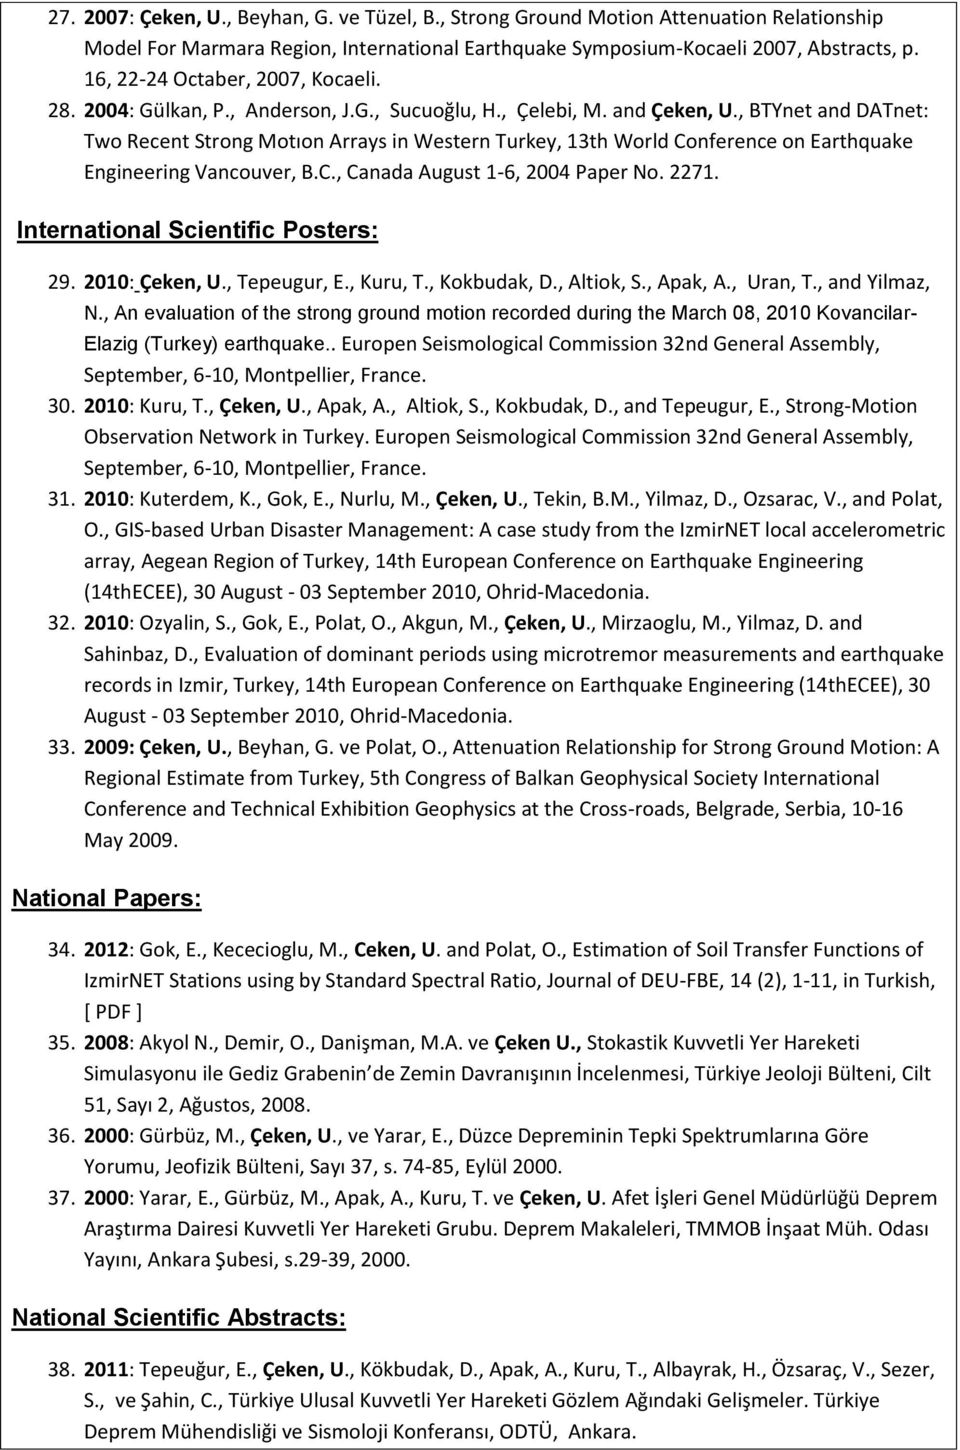 , BTYnet and DATnet: Two Recent Strong Motıon Arrays in Western Turkey, 13th World Conference on Earthquake Engineering Vancouver, B.C., Canada August 1-6, 2004 Paper No. 2271.